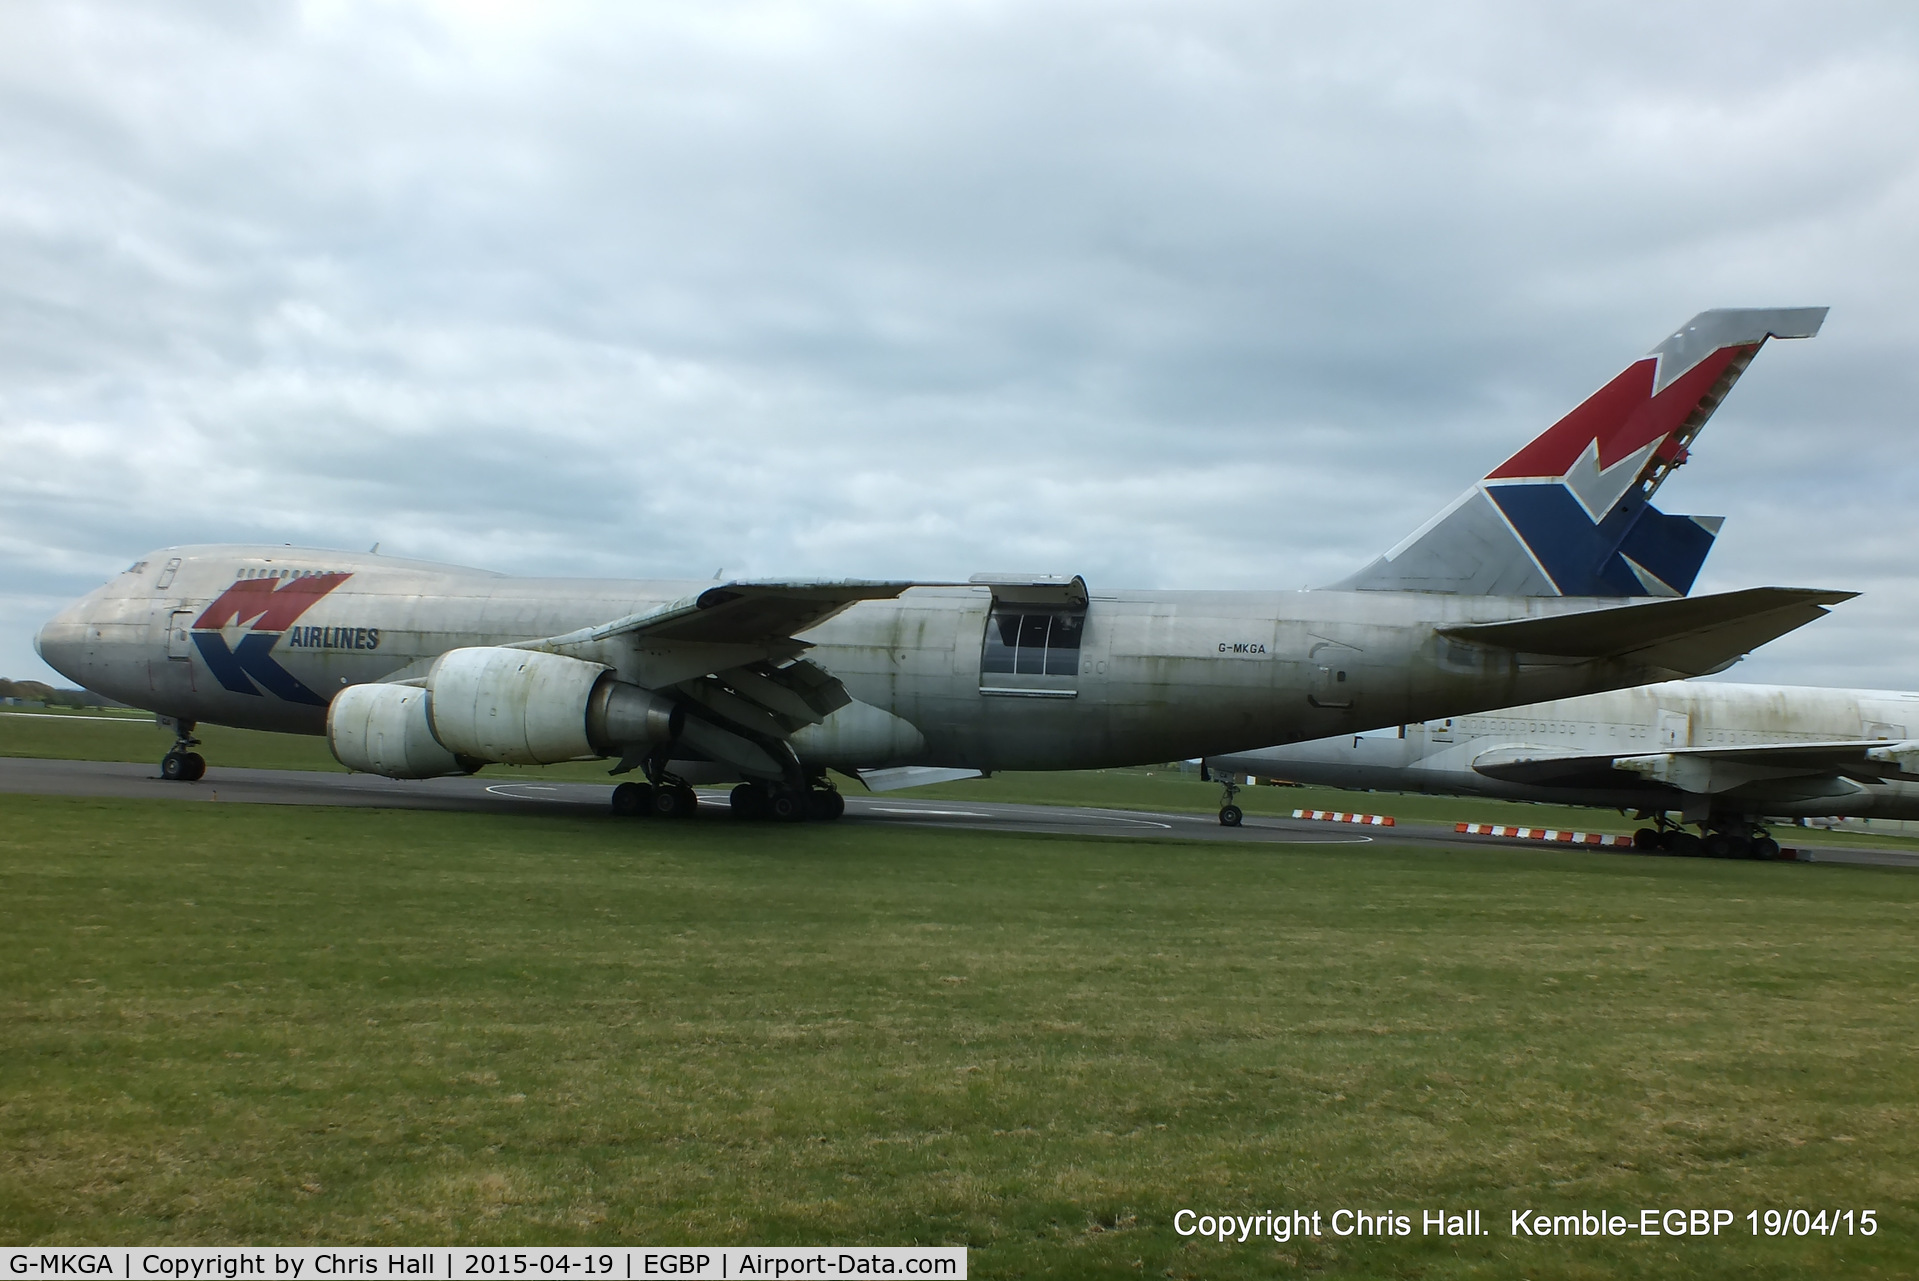 G-MKGA, 1979 Boeing 747-2R7F/SCD C/N 21650, stored at Kemble since May 2009